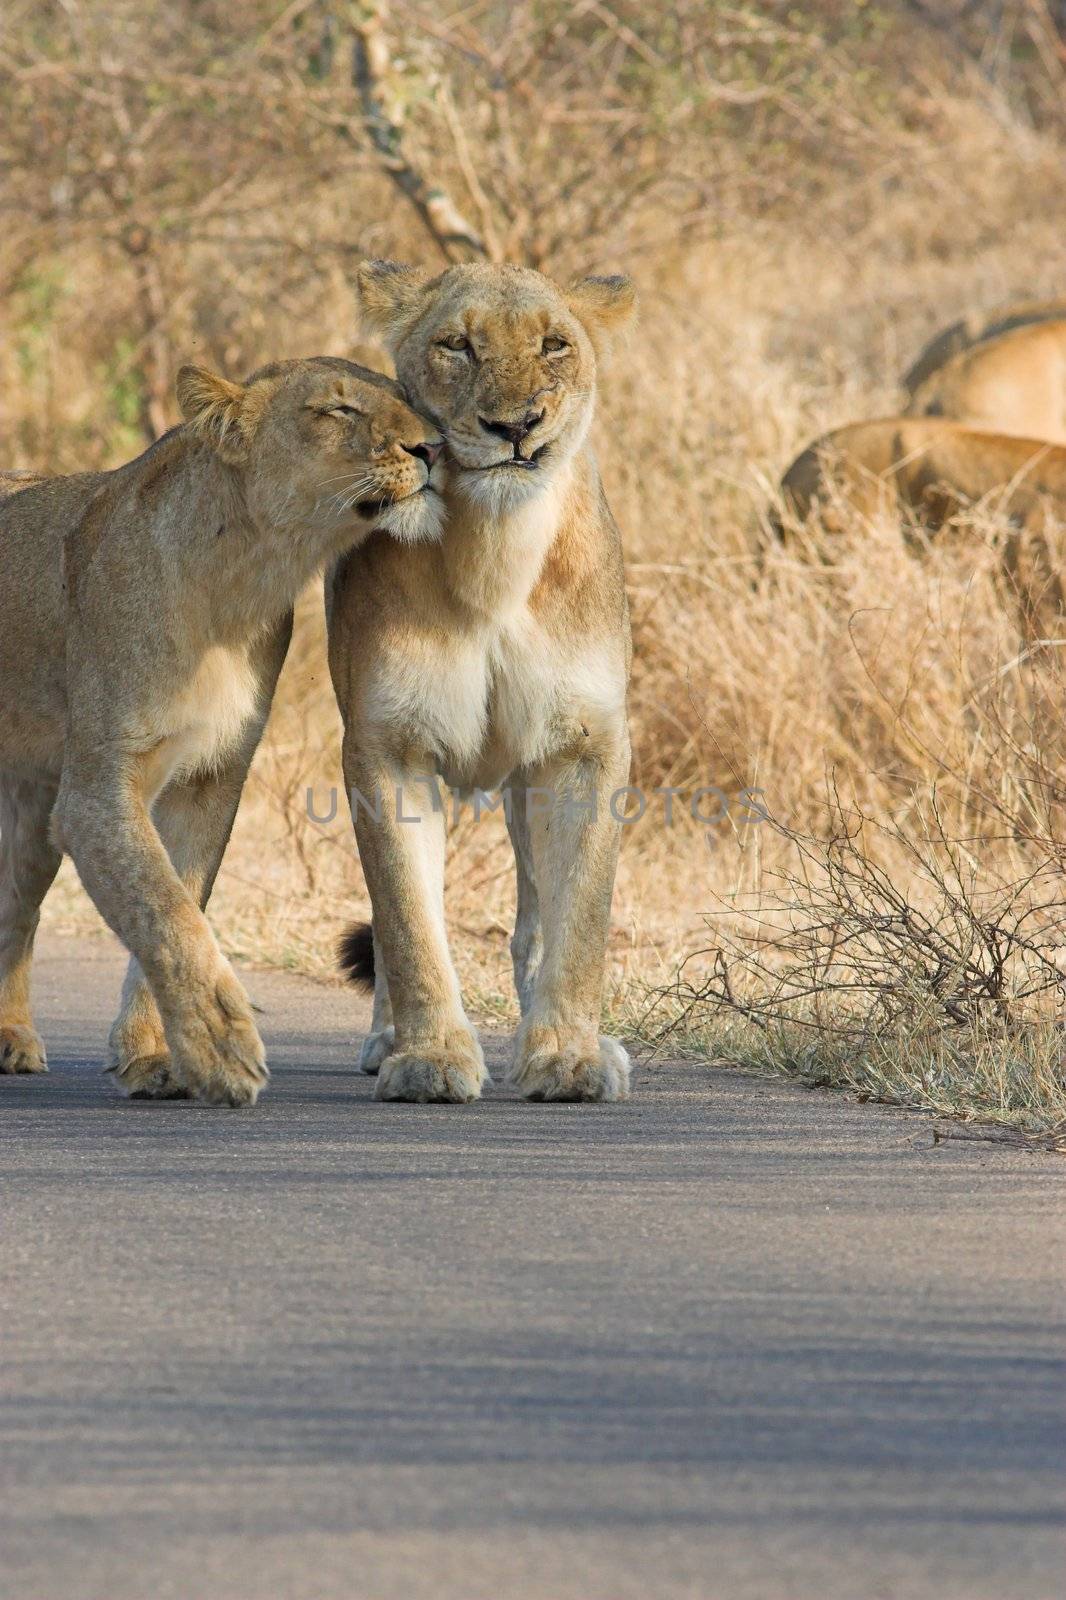 Lioness trying to show some affection to another in the pride